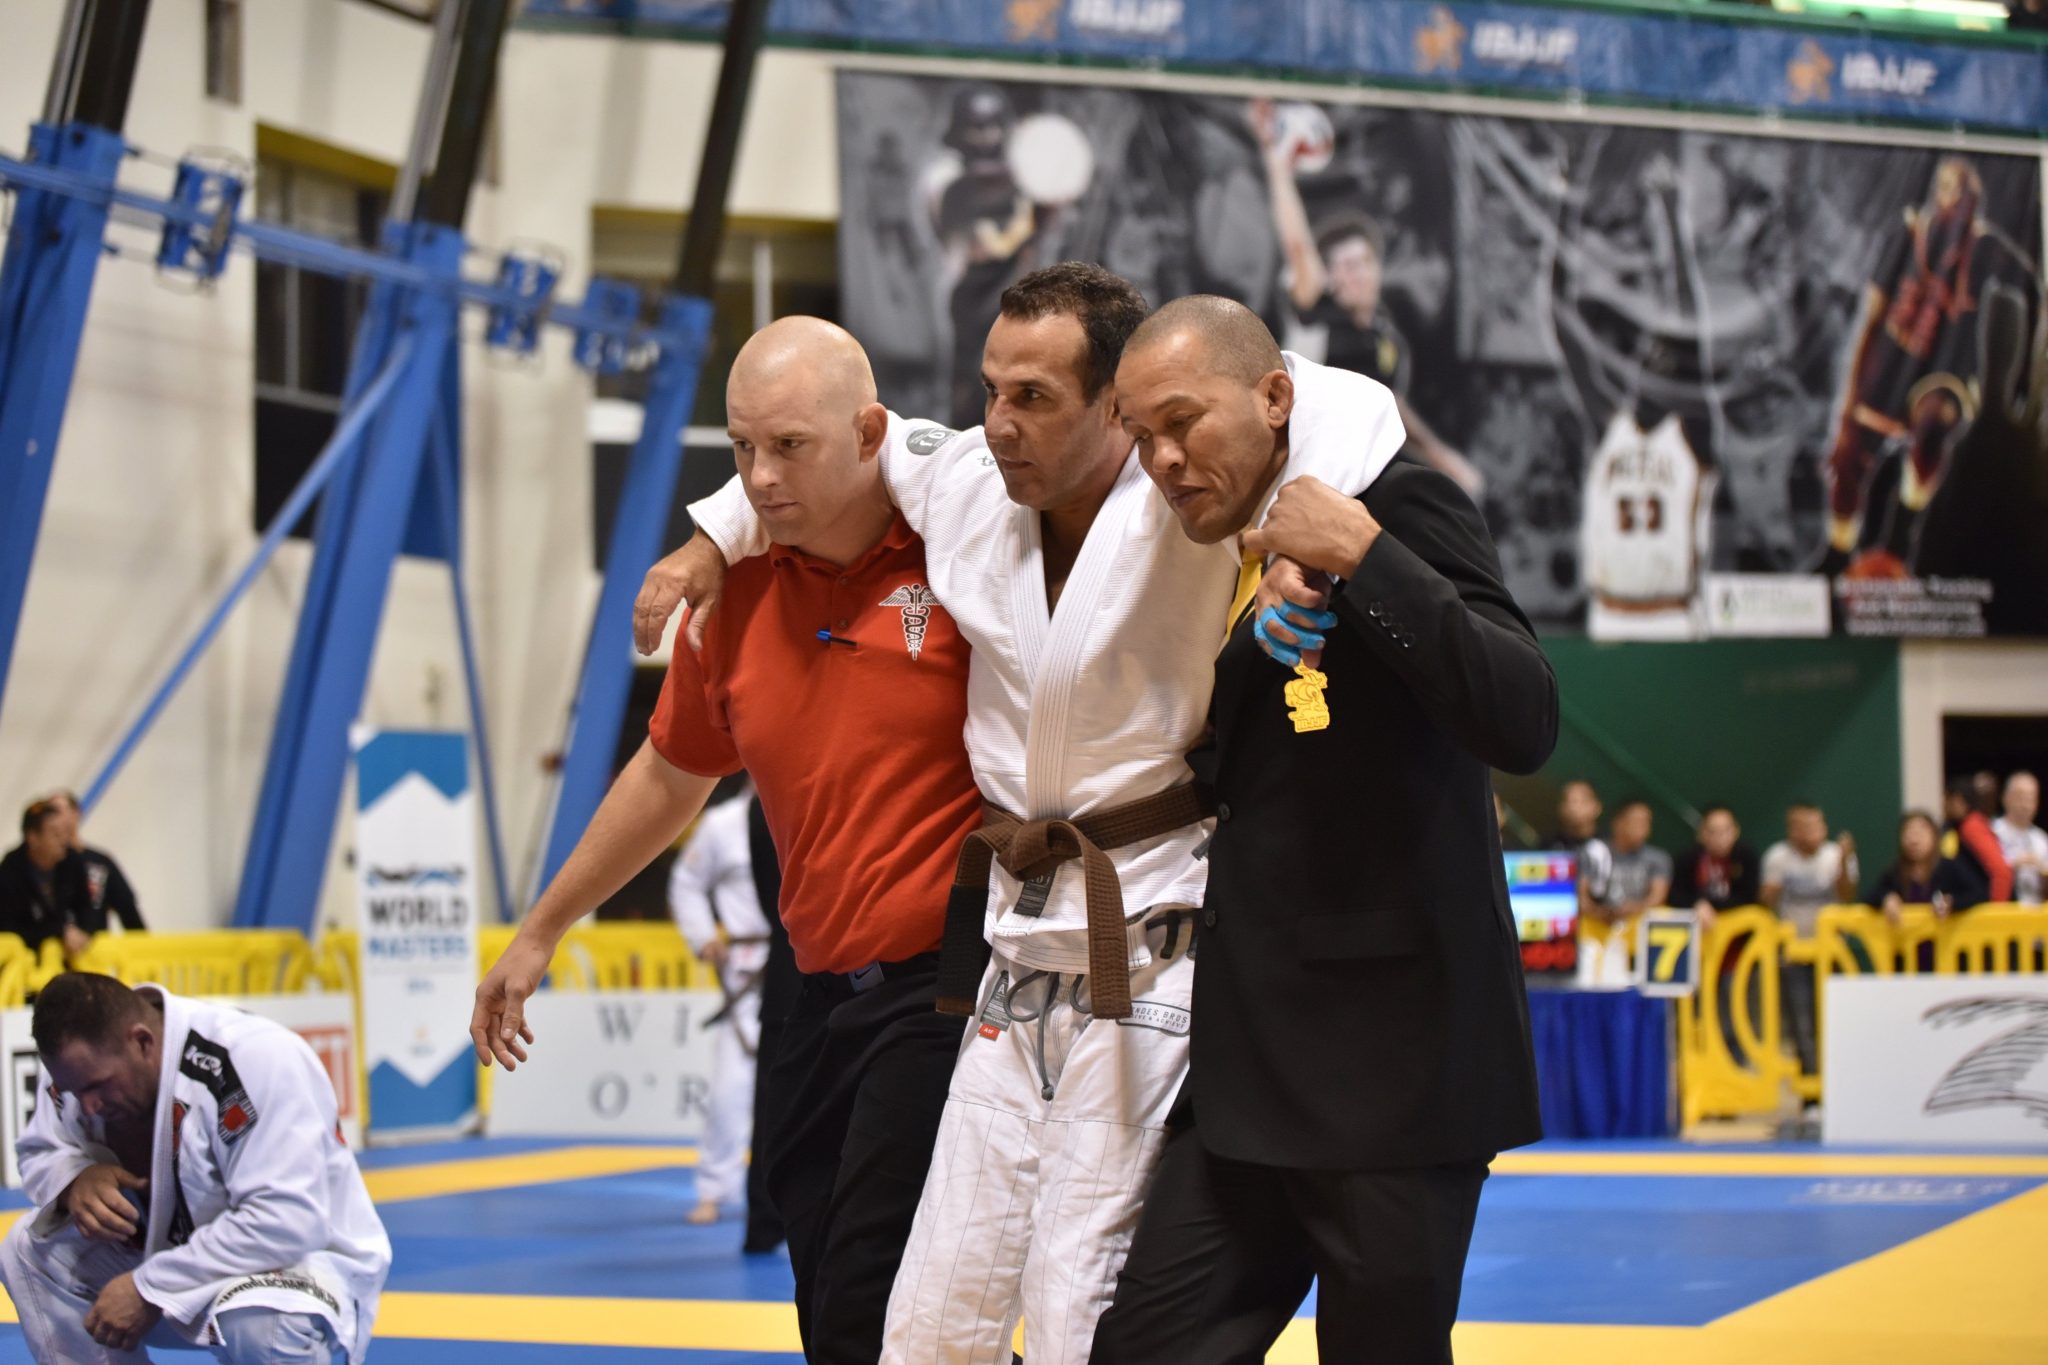 Injuries in Brazilian Jujitsu Prompt Introspection in Growing Martial Art -  The New York Times